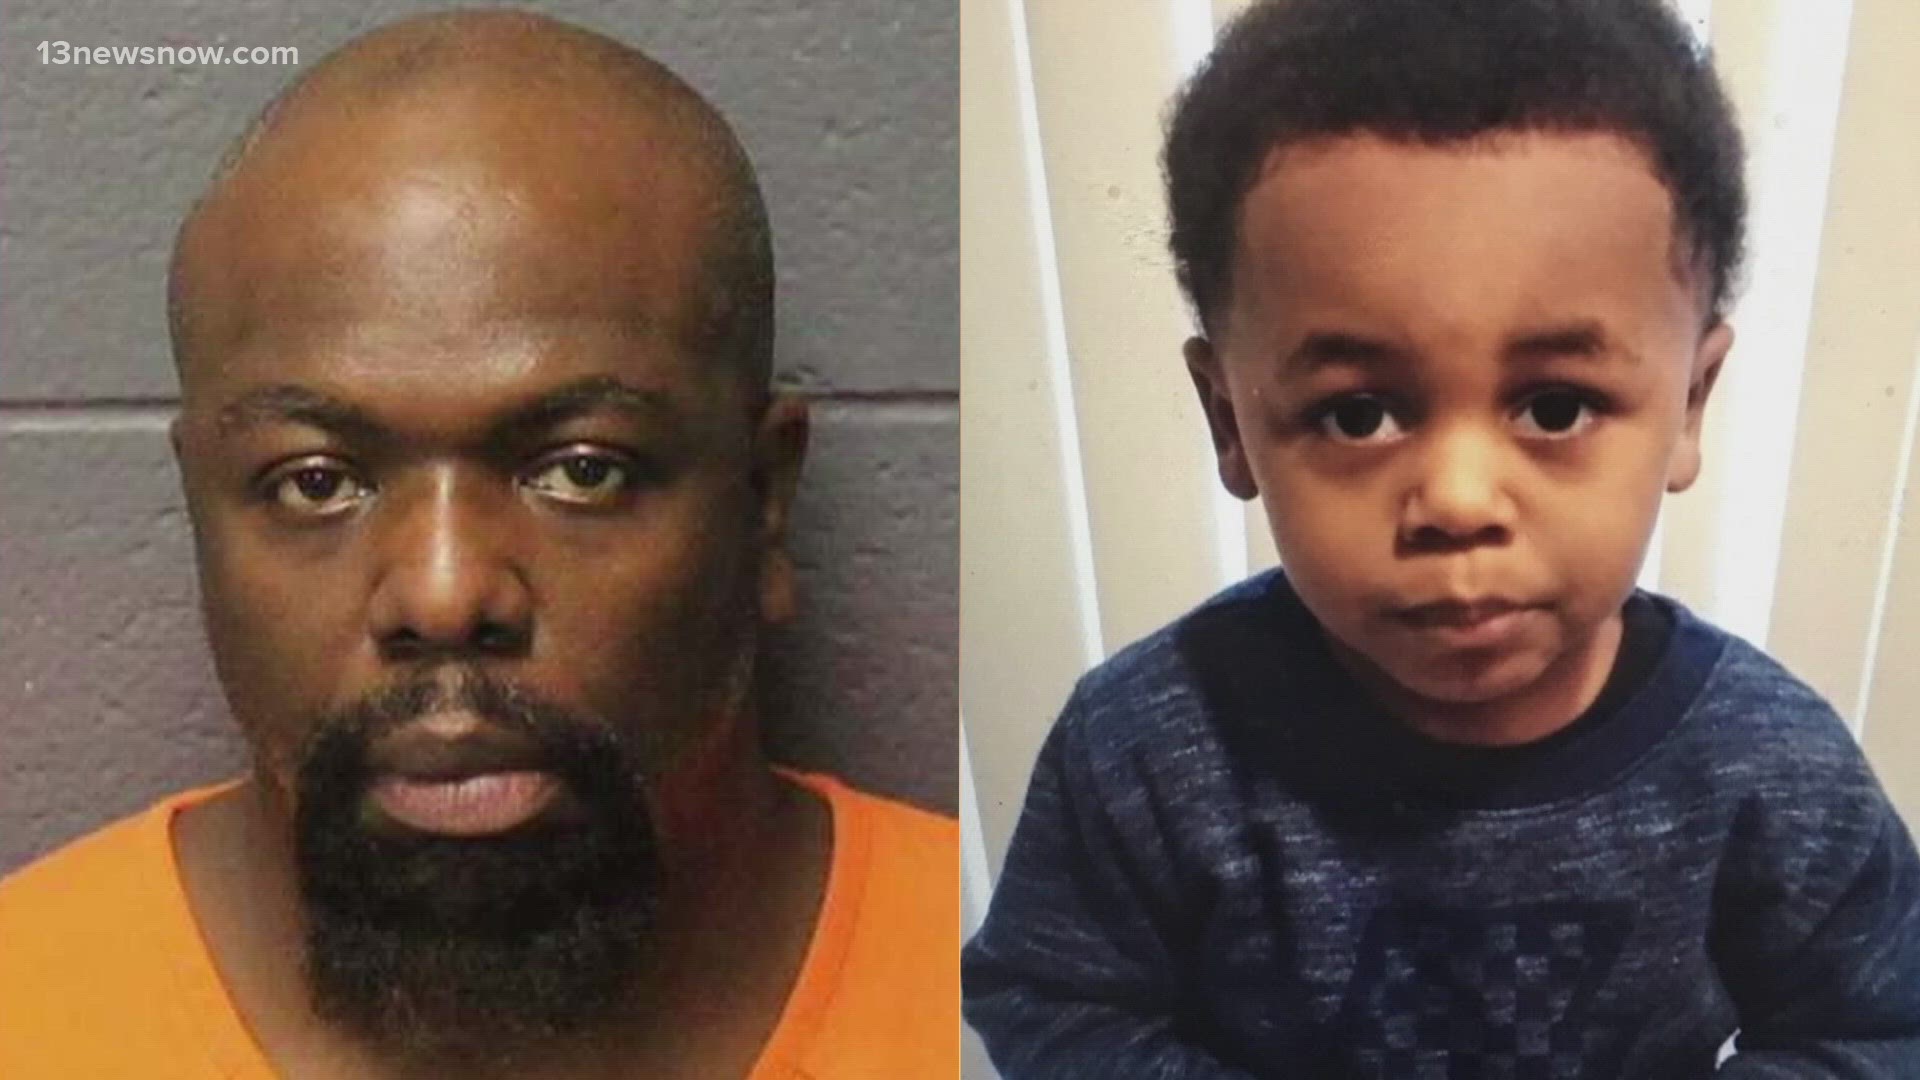 Bigsby is accused of murdering his 4-year-old son Codi, who was reported missing from Hampton in January 2022.